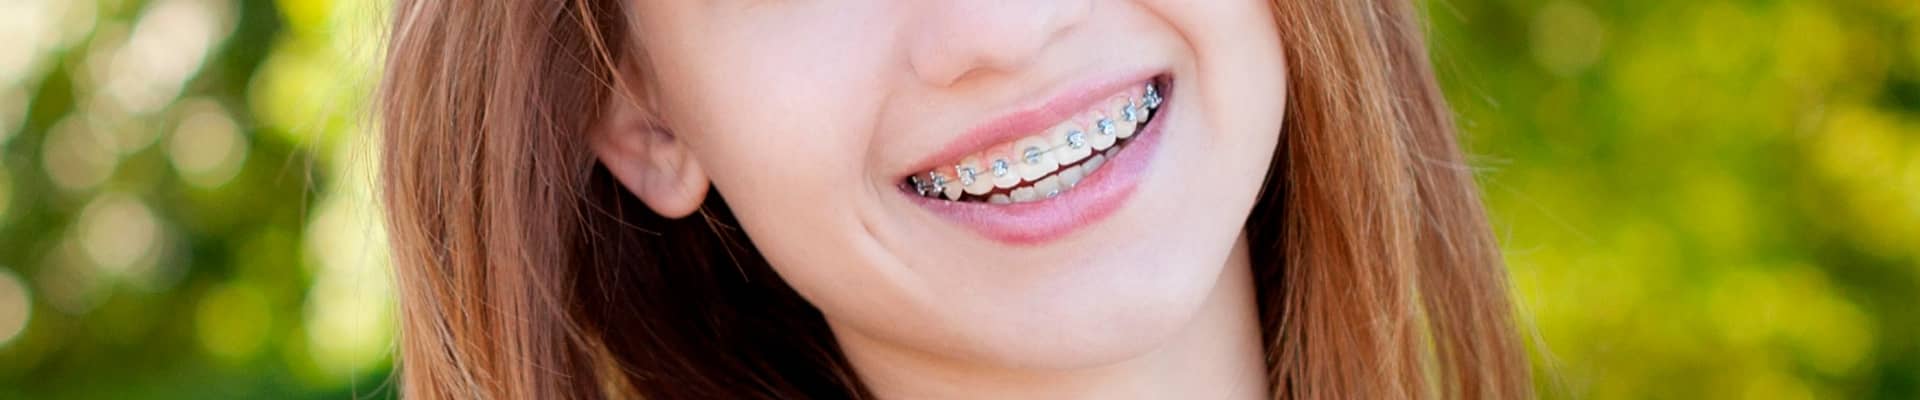 young women with braces